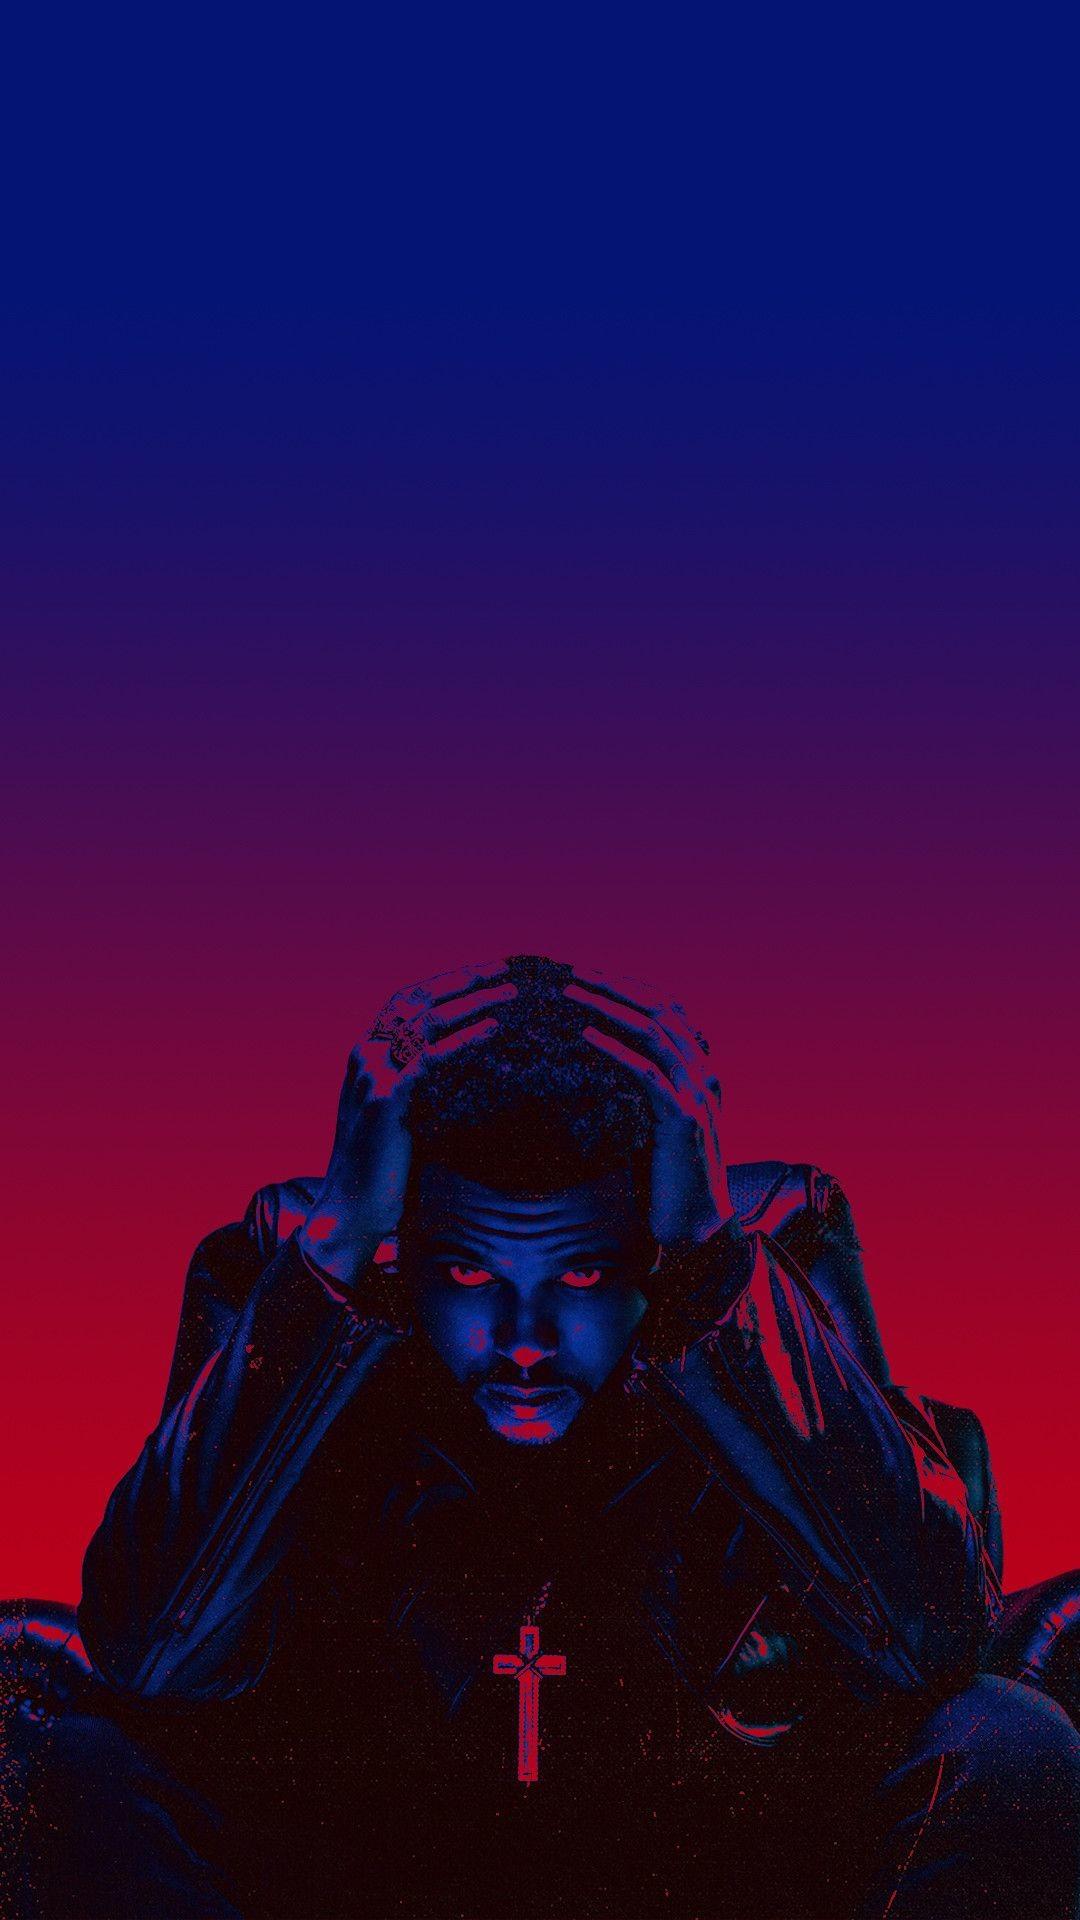 The Weeknd wallpaper for iPhone and Android phone - Chance the Rapper